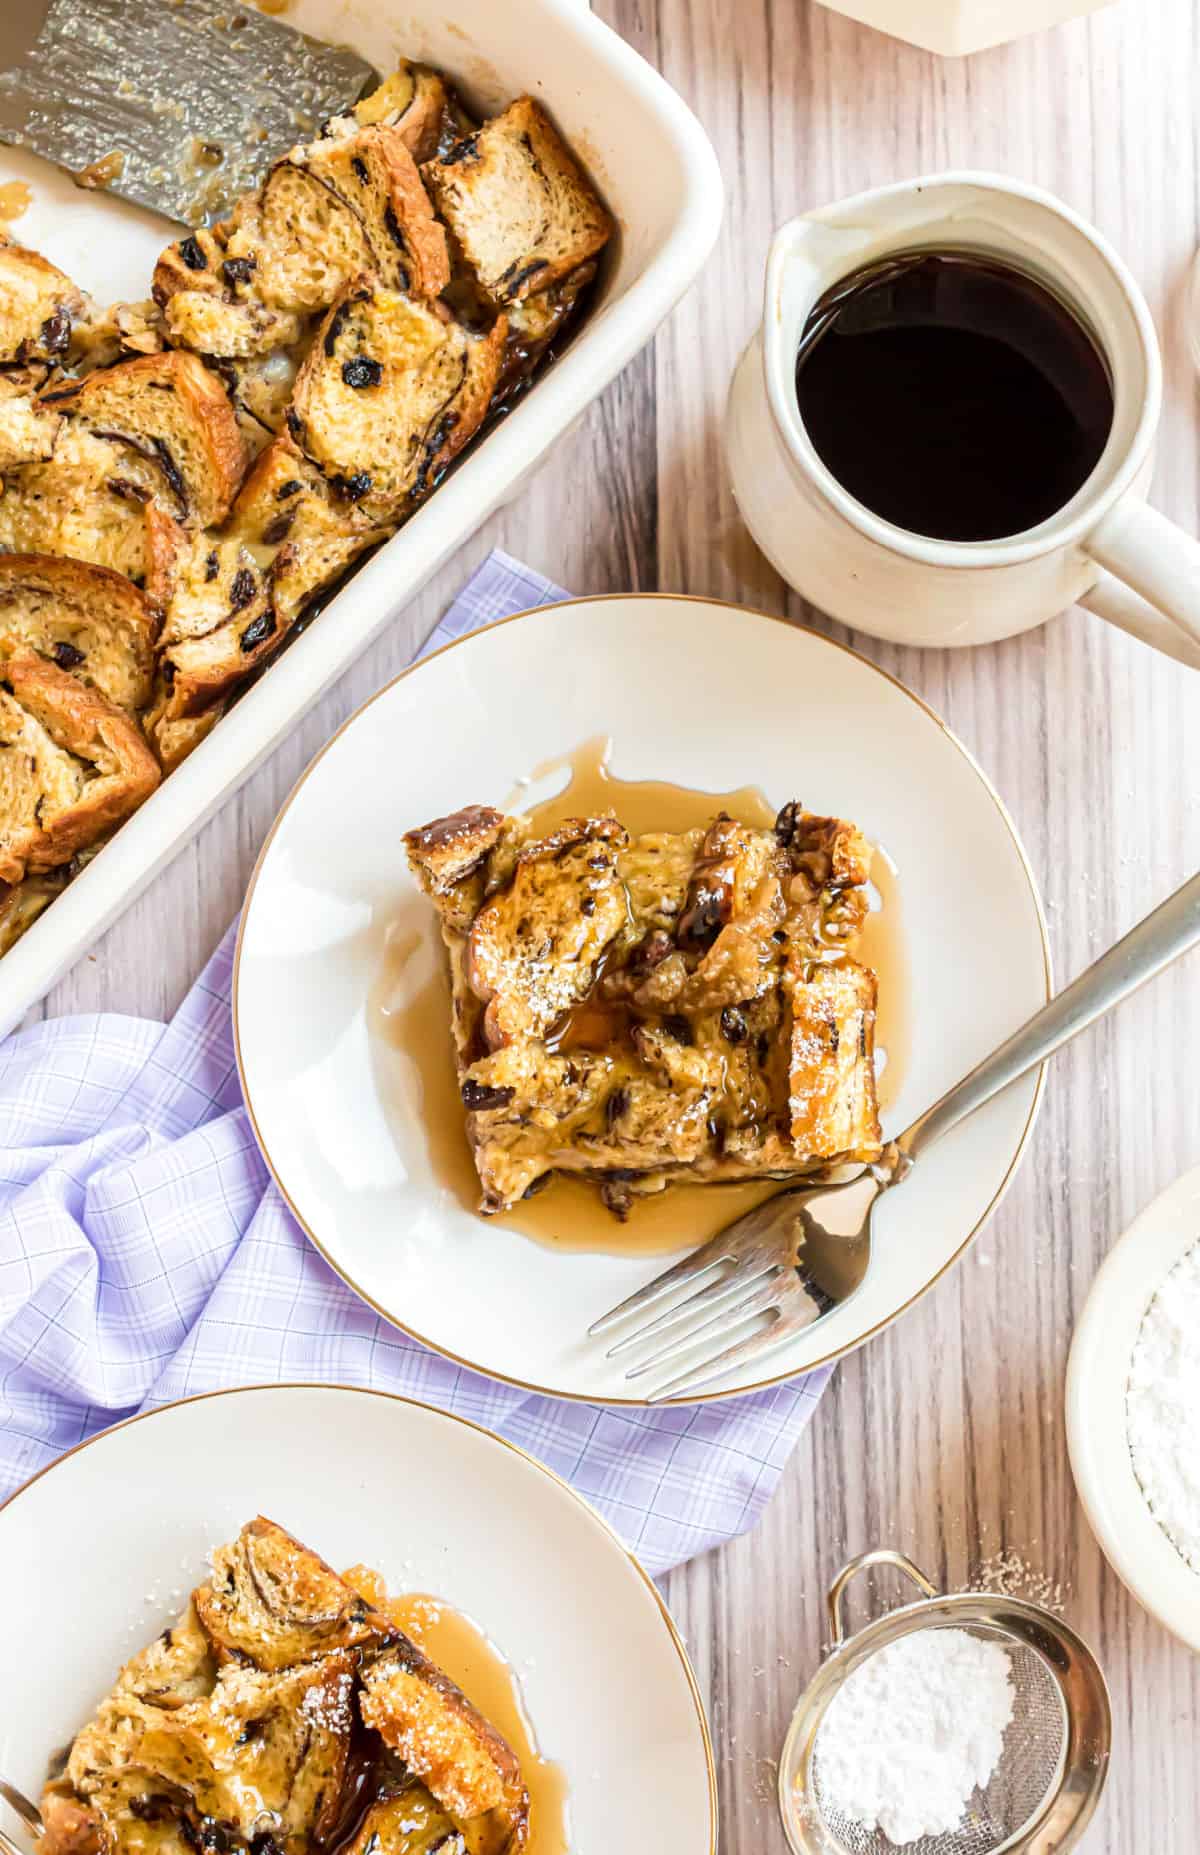 Slices of french toast casserole served with syrup and powdered sugar.